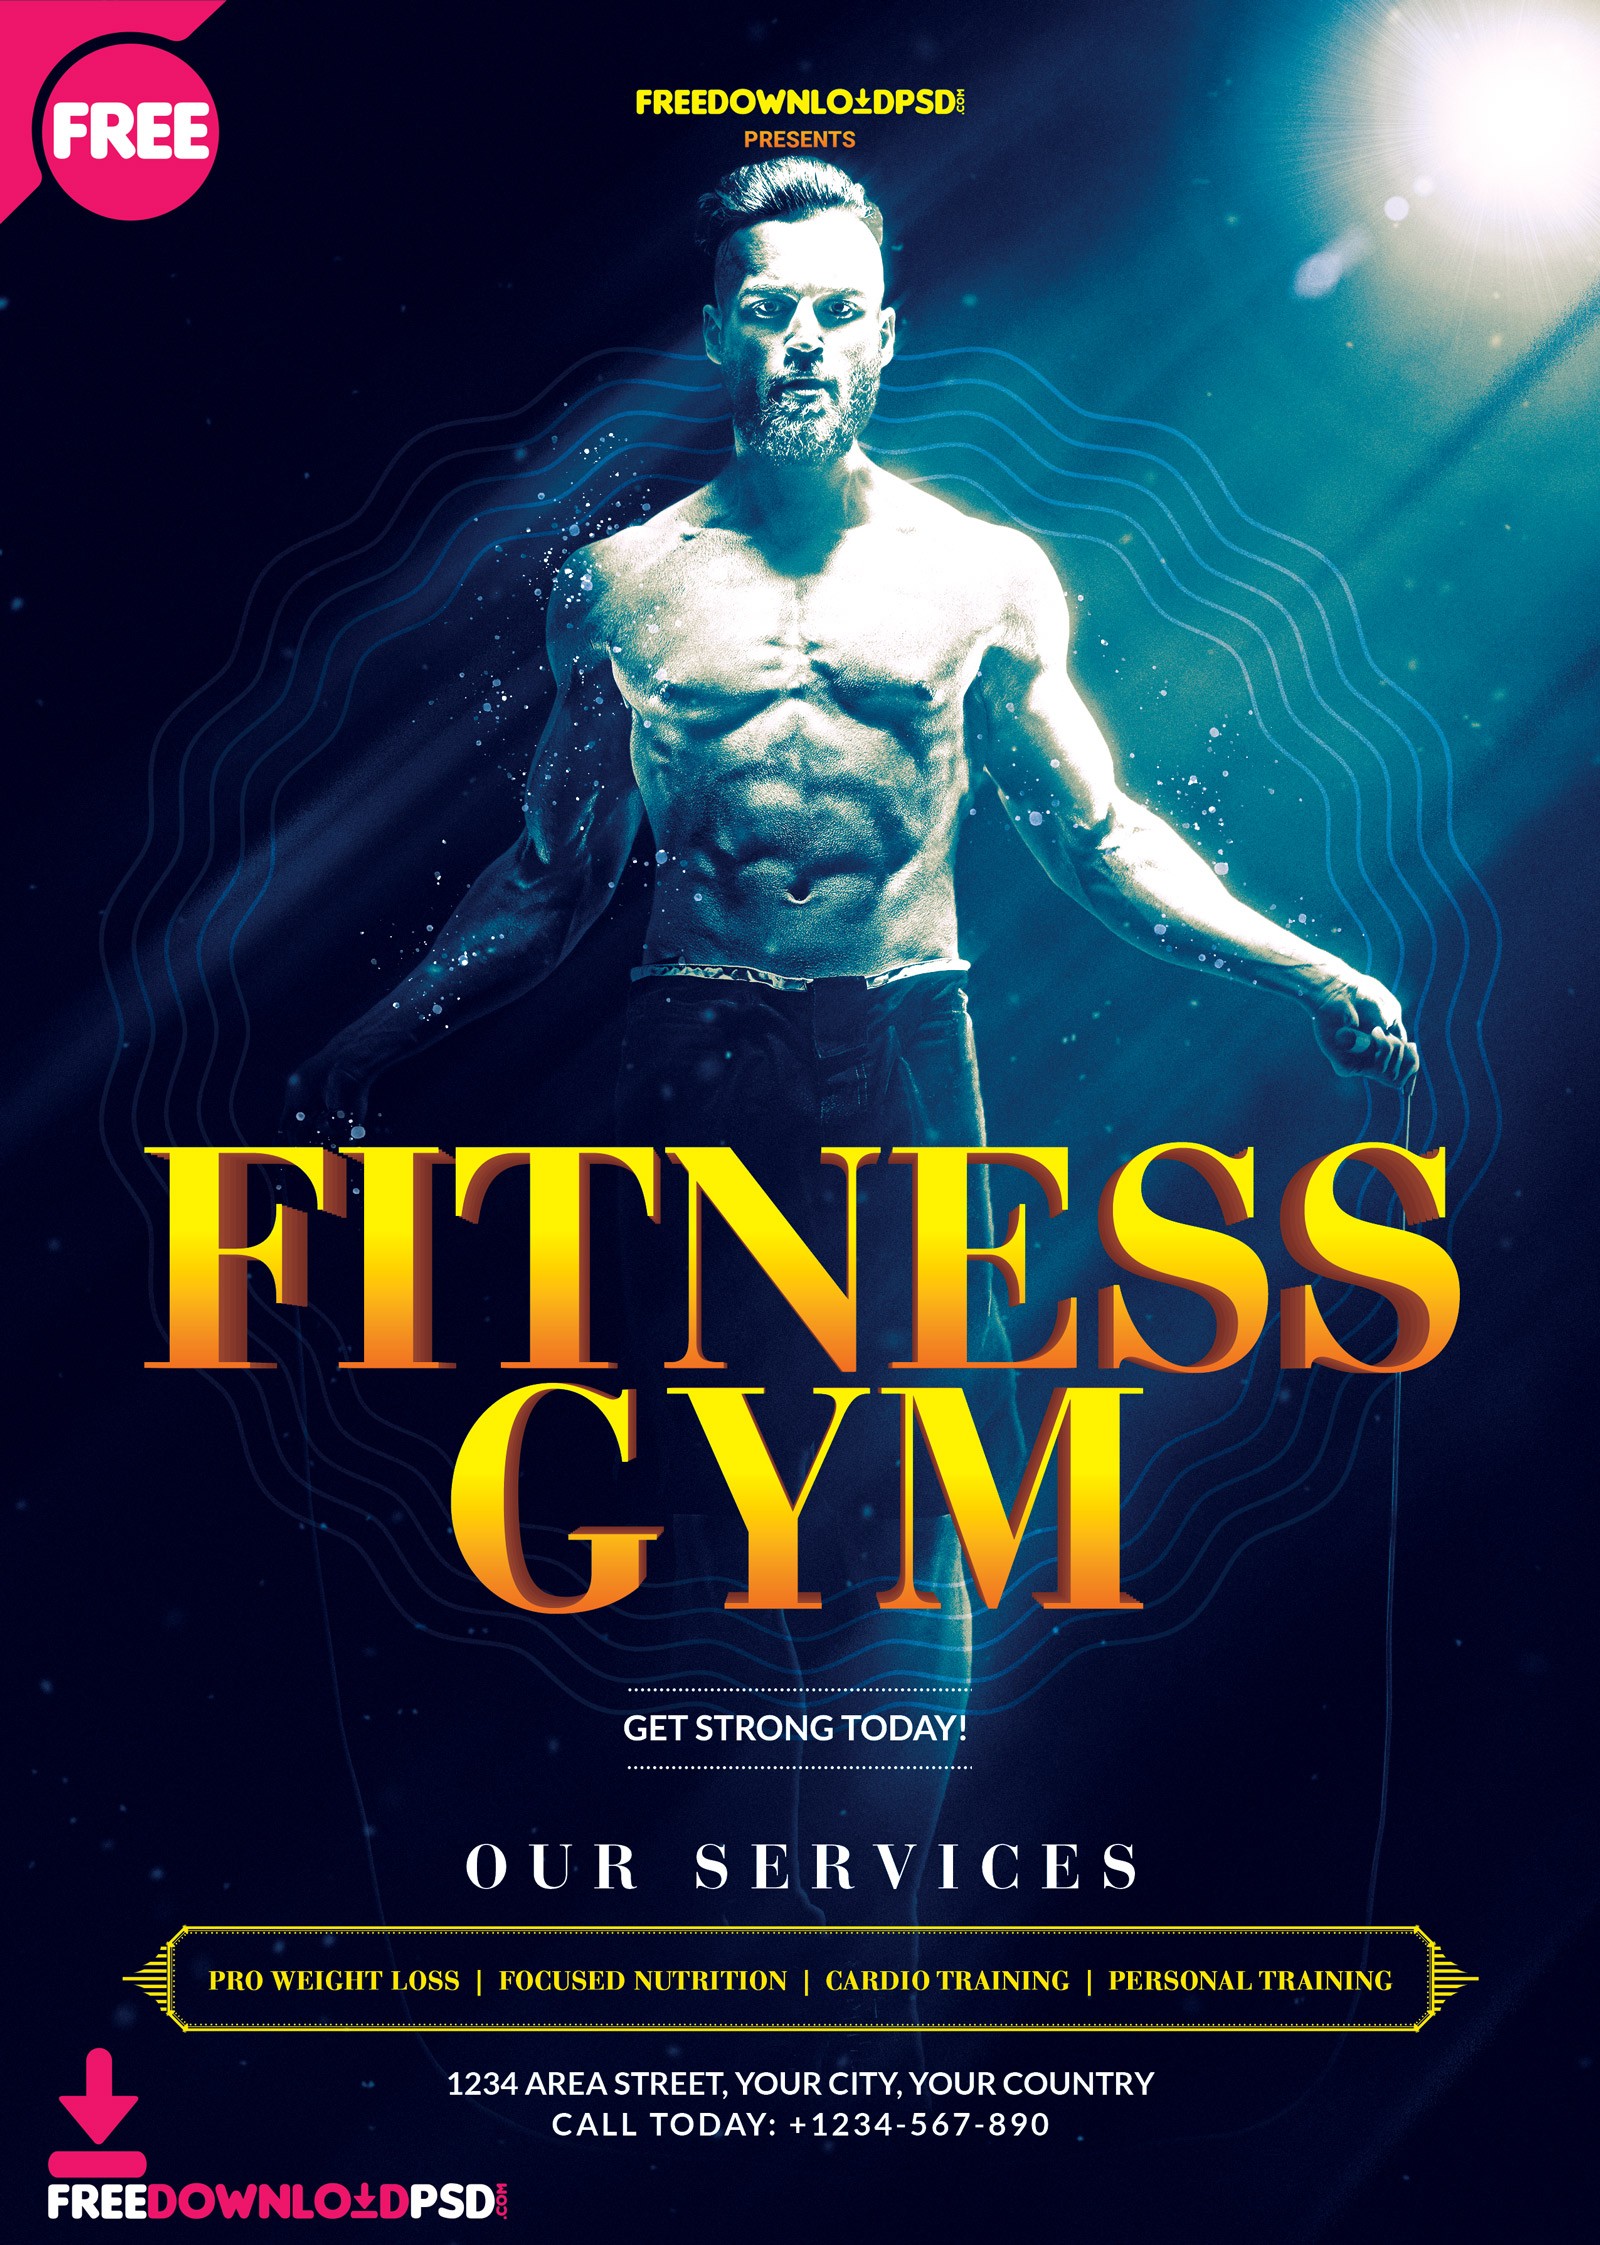 Fitness Gym Free Flyer PSD Template